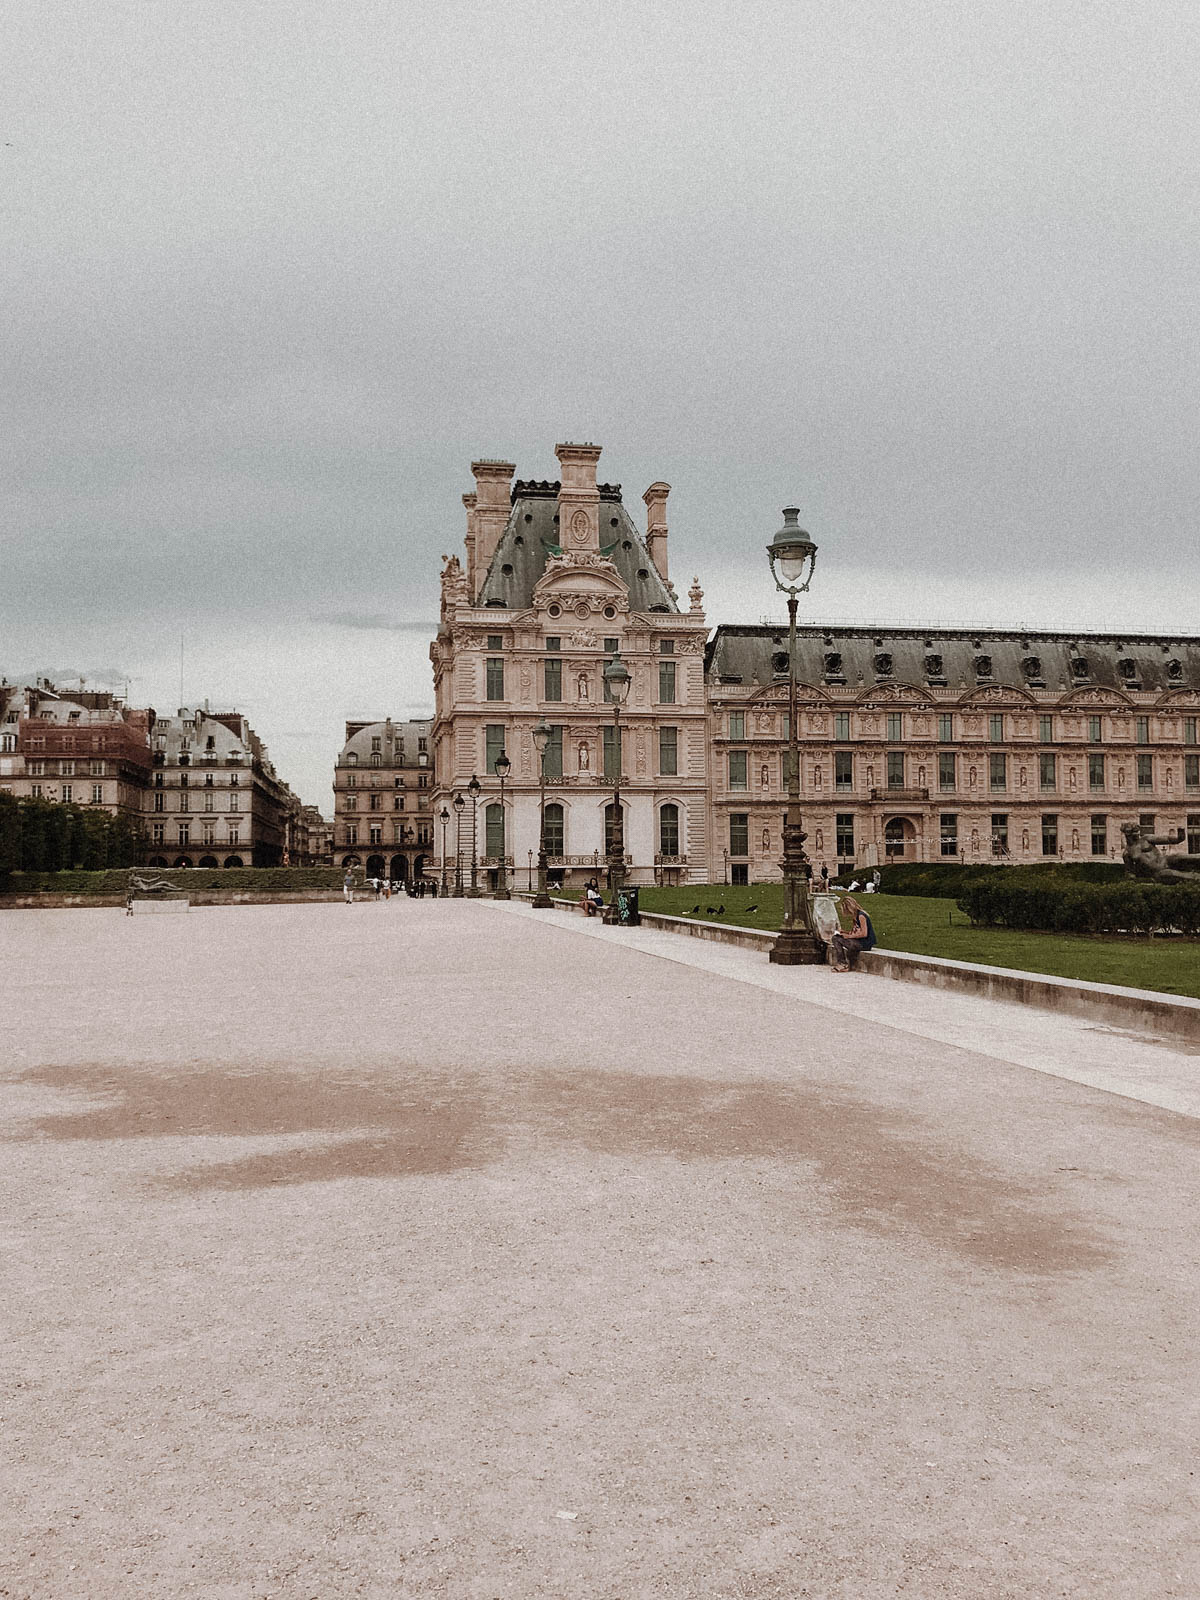 Paris France Travel Guide - Jardin du Luxembourg, European Architecture and Parks / RG Daily Blog